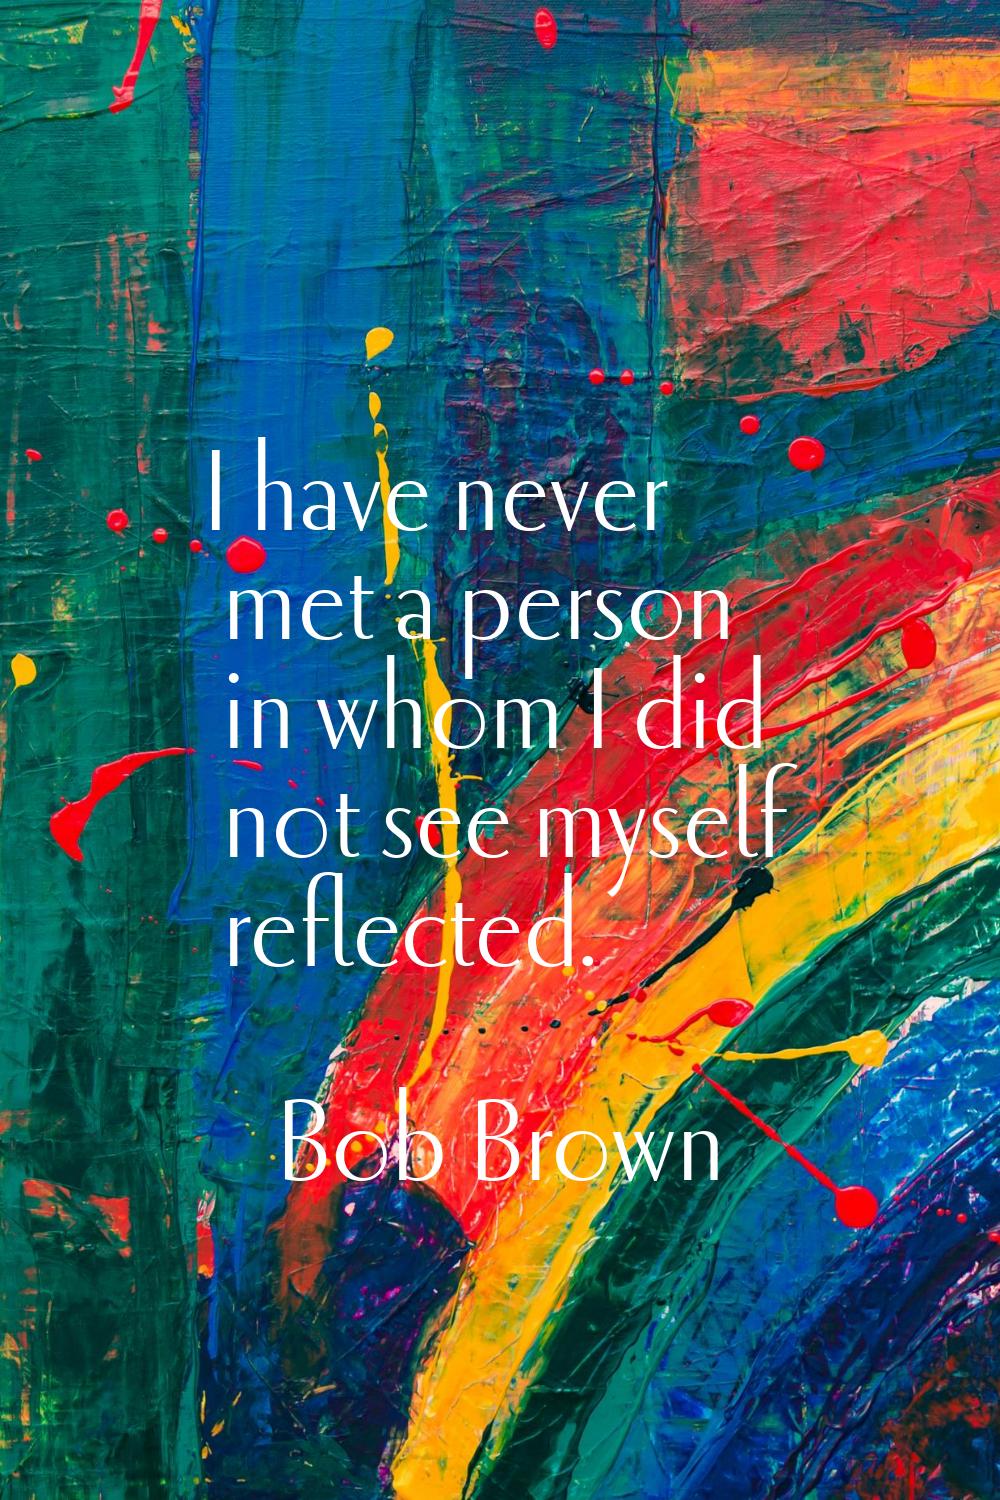 I have never met a person in whom I did not see myself reflected.